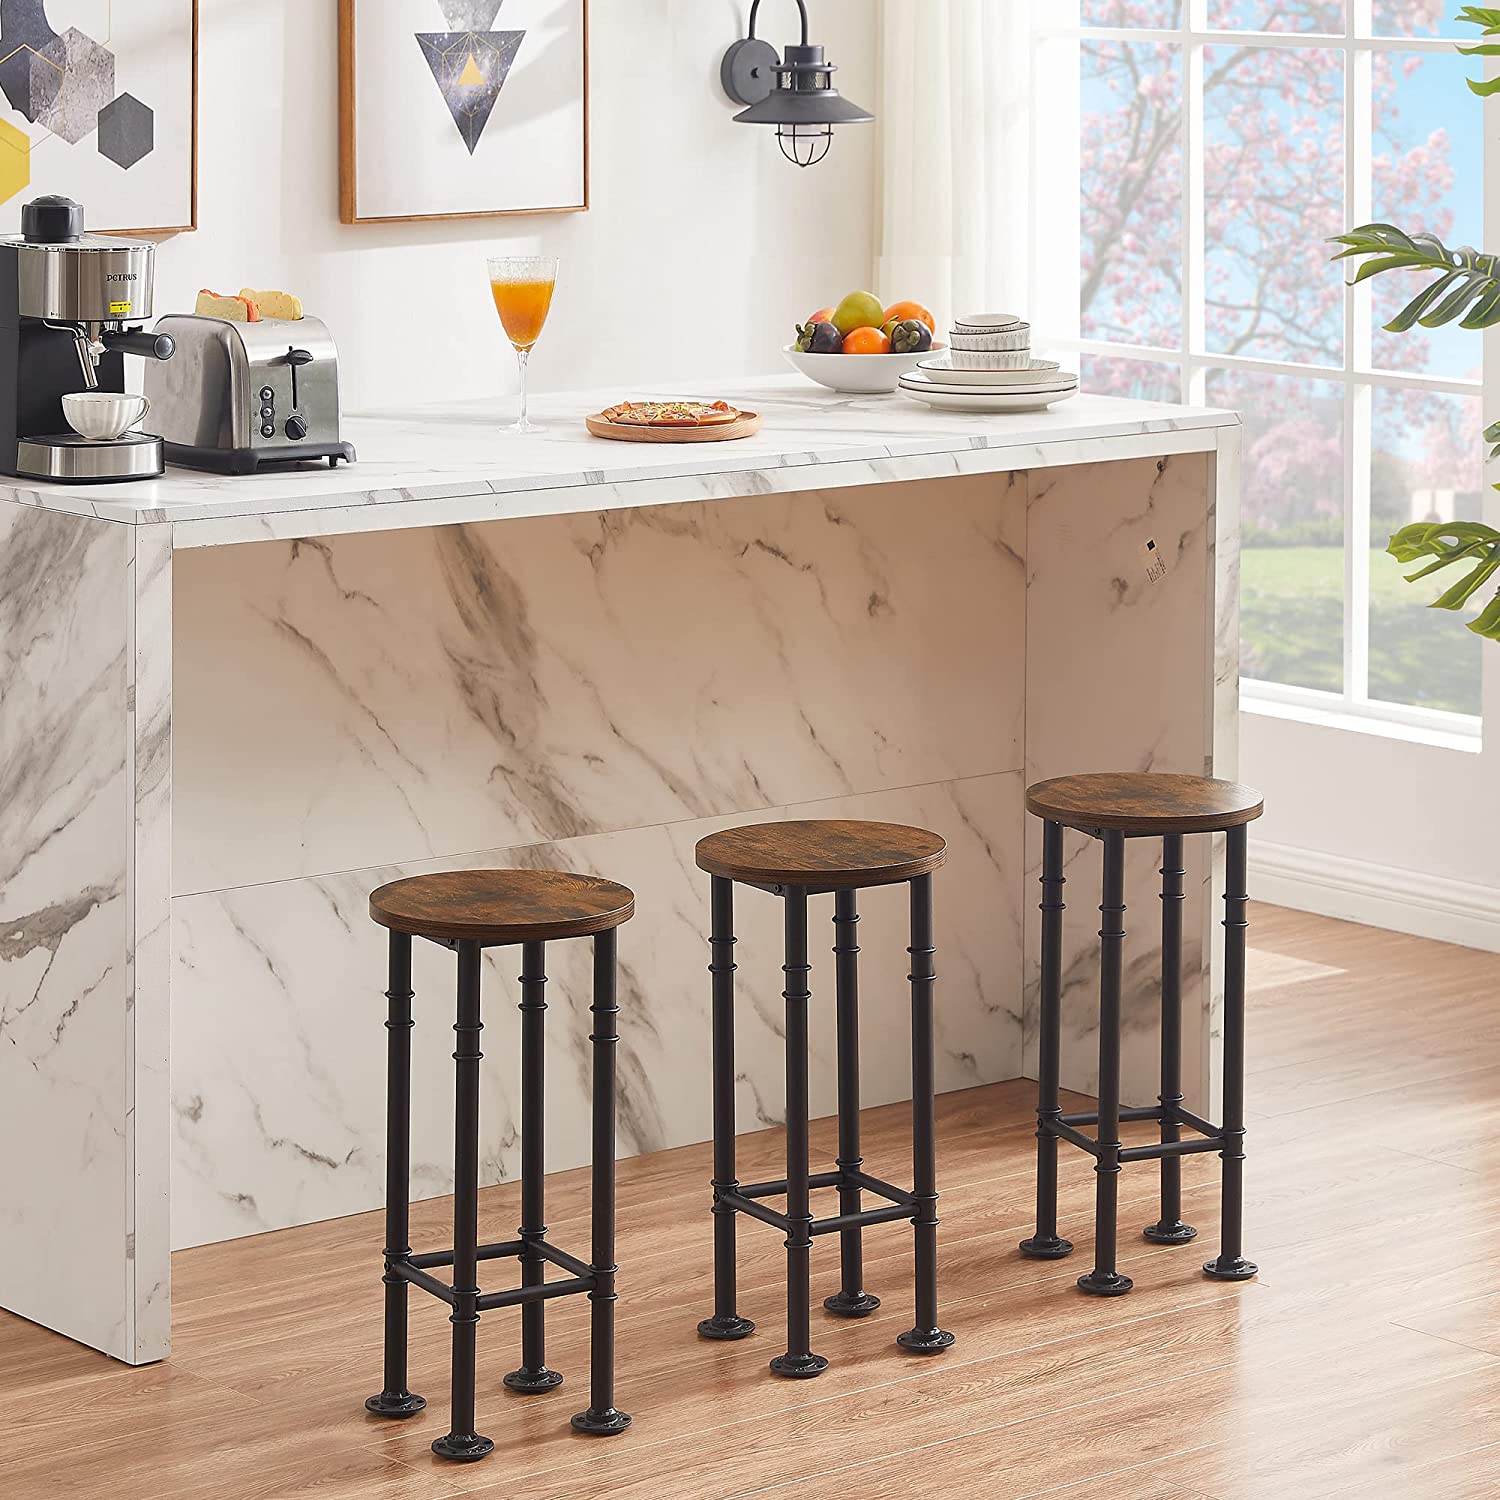 VECELO Counter Height Bar Stools Set of 2, Barstool with Back Legs, Dining Chairs for Home and Kitchen Dining Room Restaurant